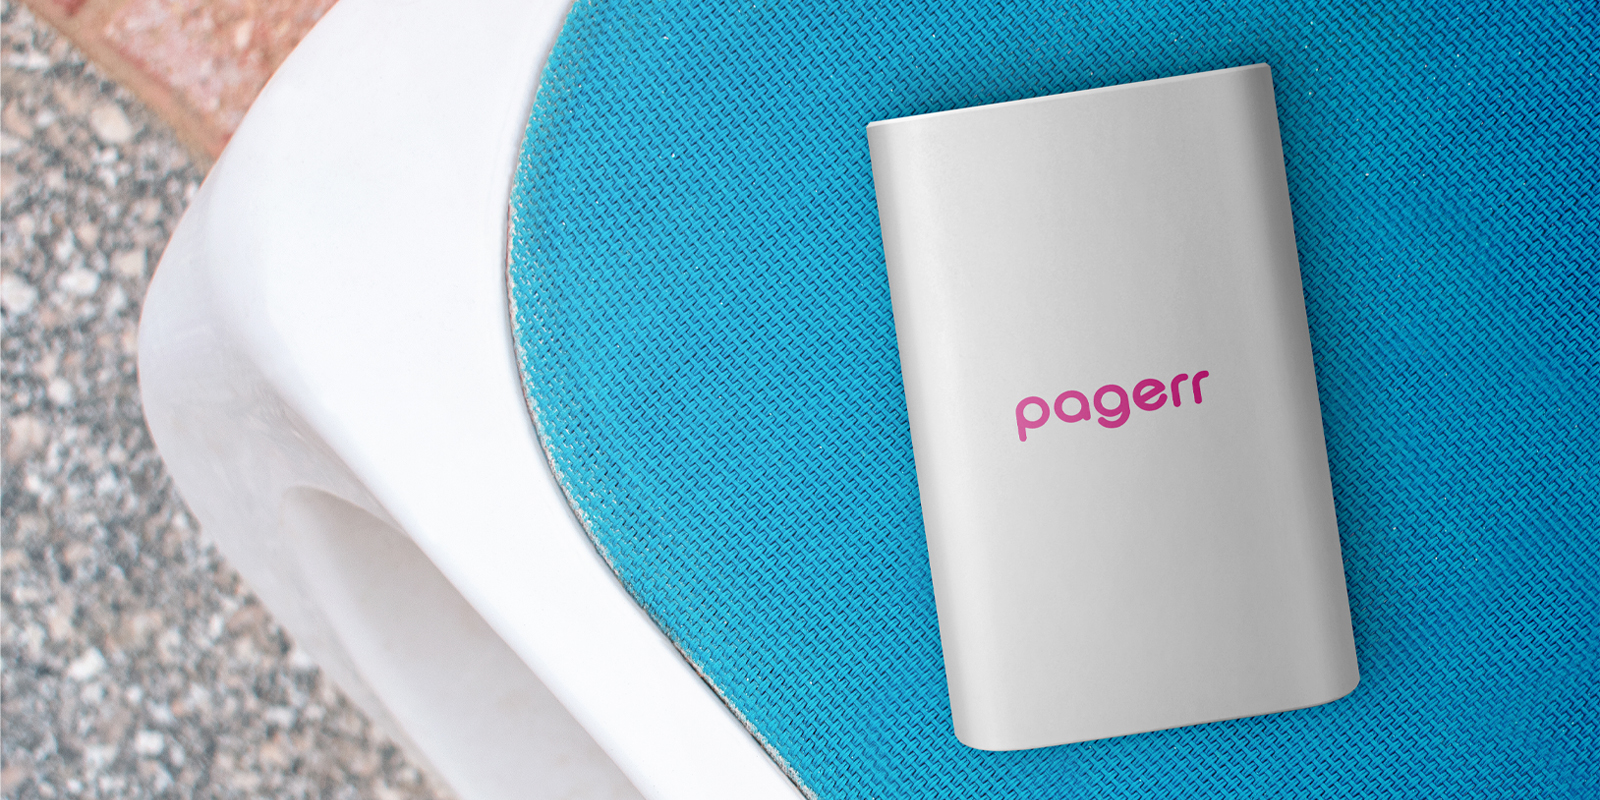 Chargers & power banks in Gold Coast - Print with Pagerr